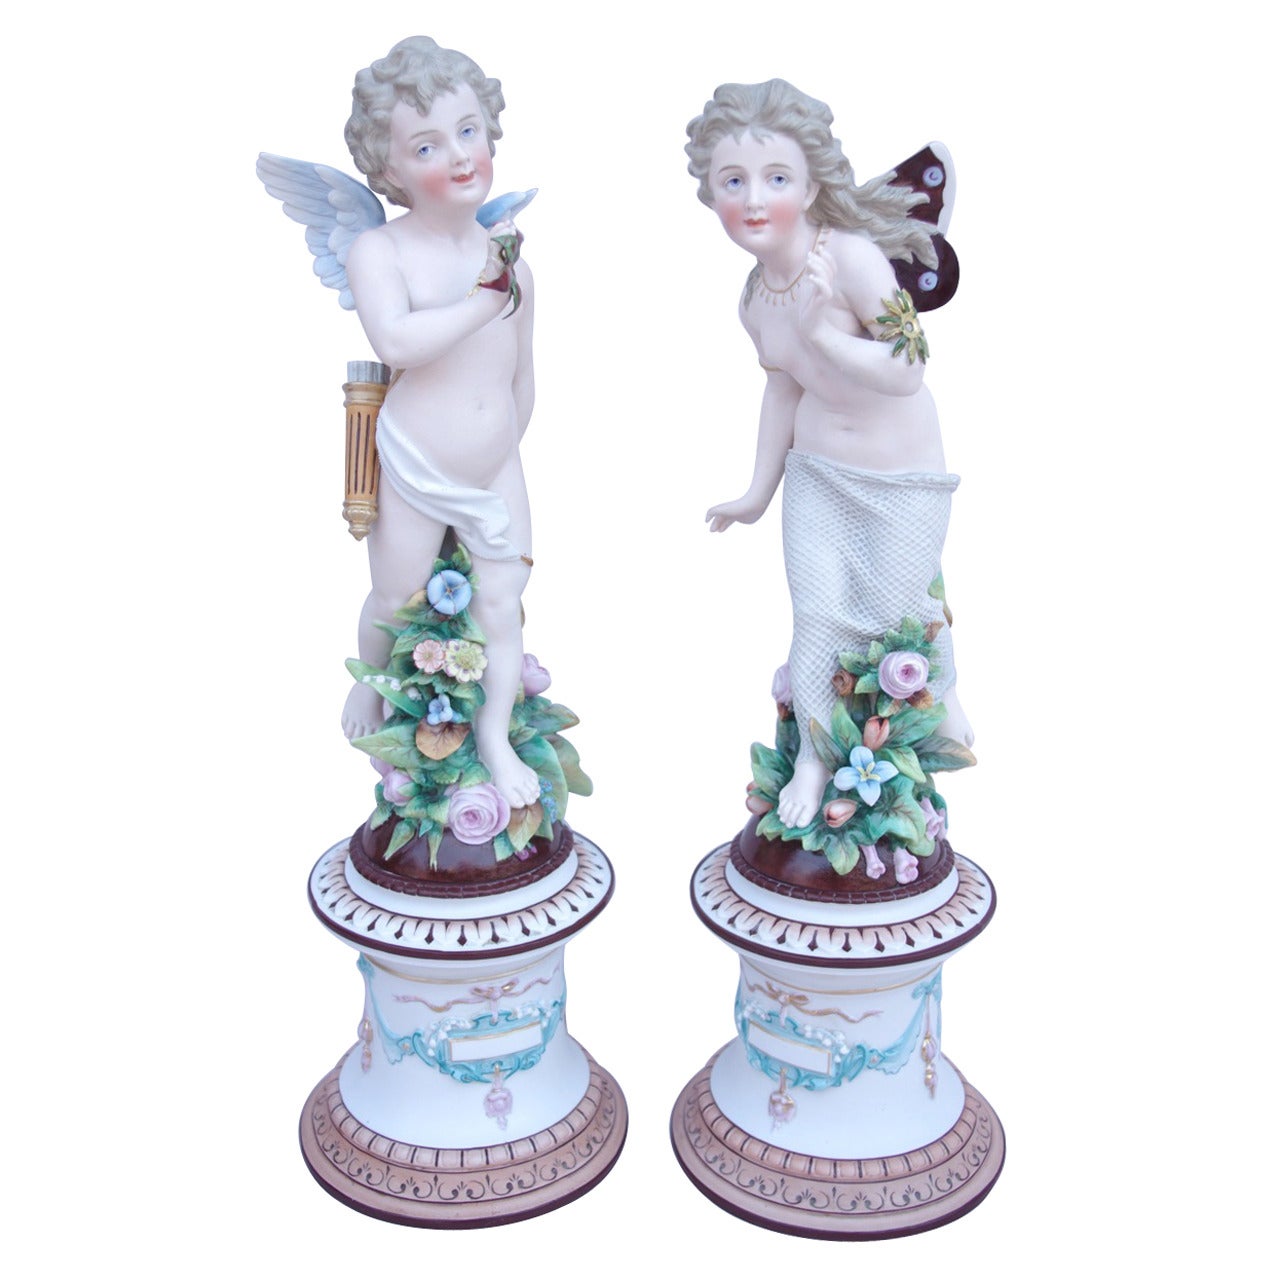 Pair of sculptures in biscuit "Psyche and Cupid" circa 1900